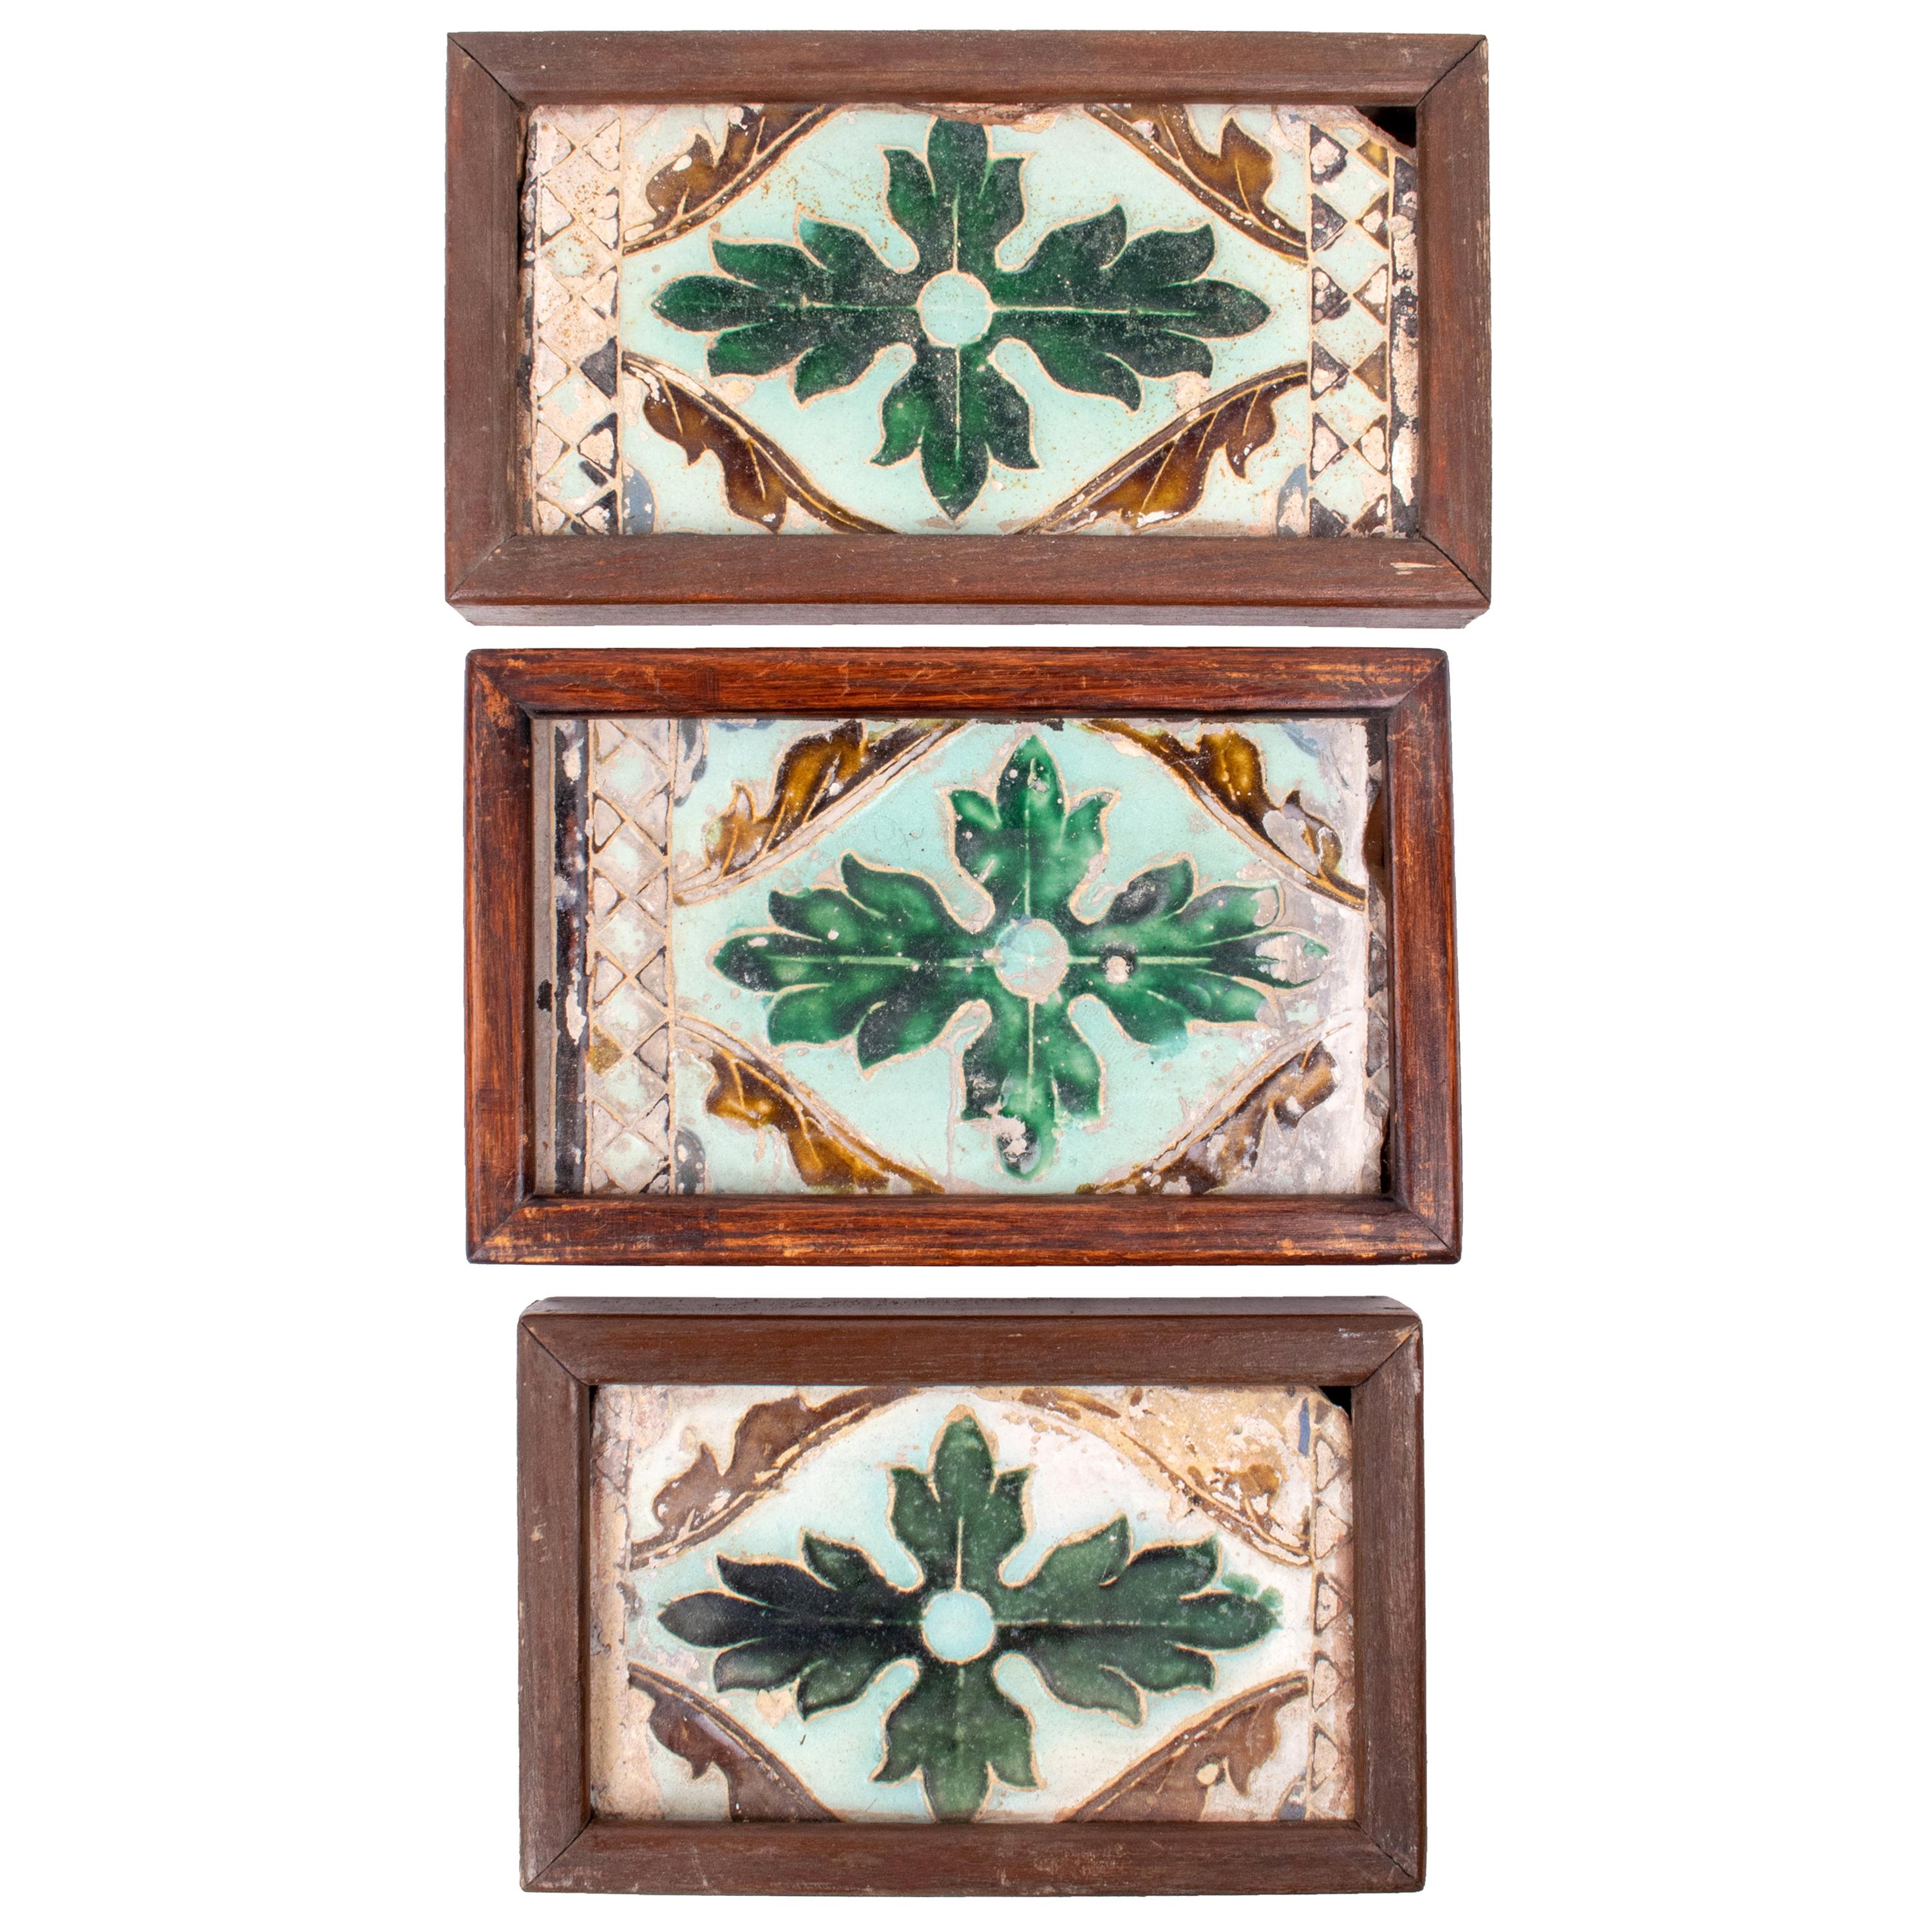 Three 16th Century Spanish Tiles Made with the Dry String Technique